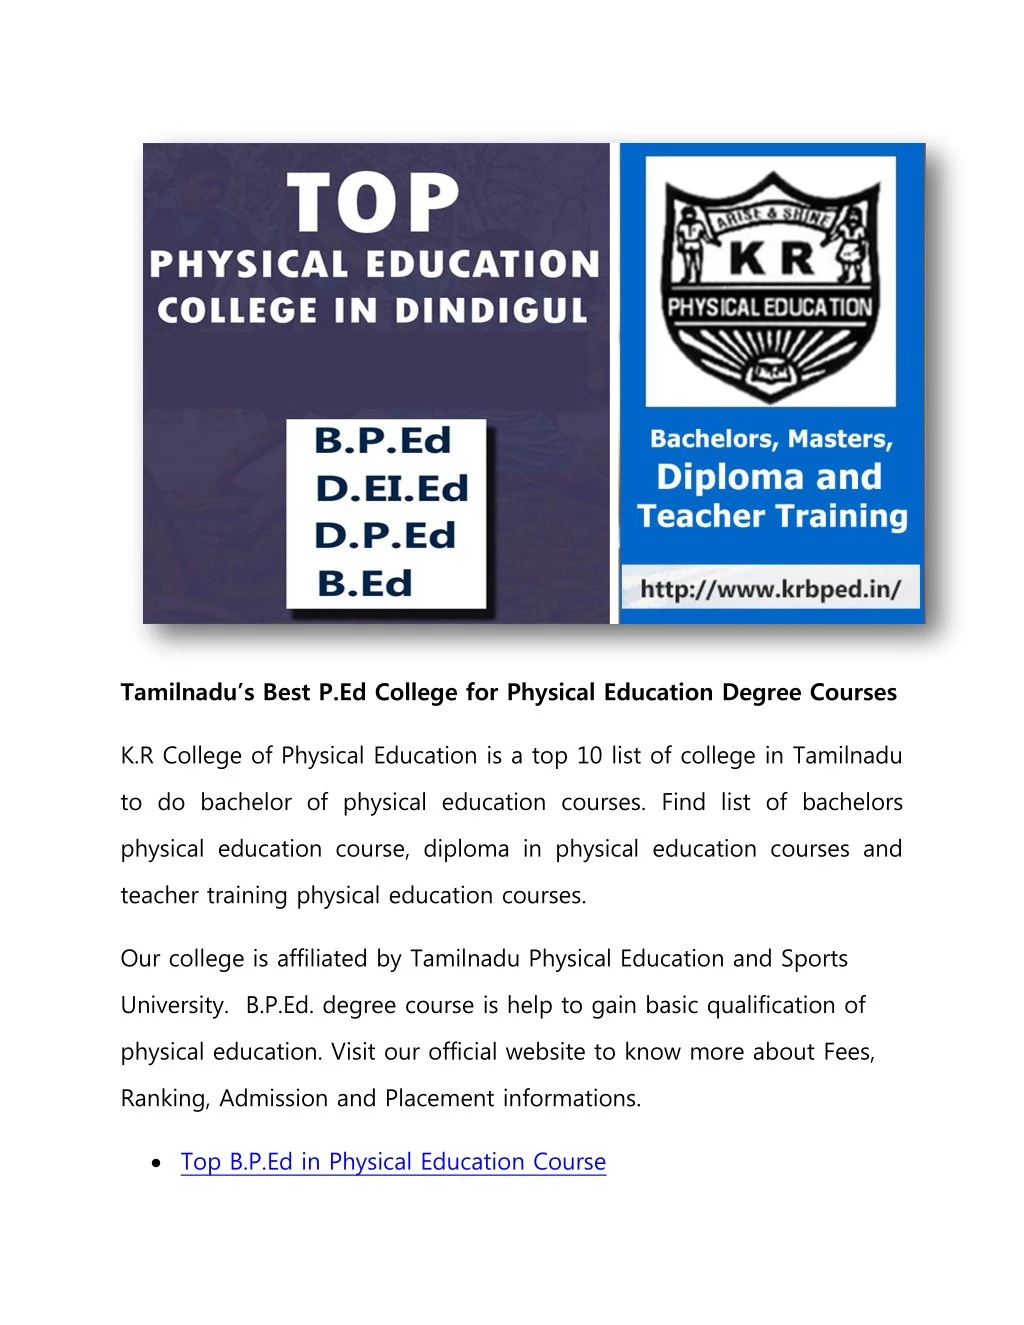 tamilnadu s best p e d college for physical